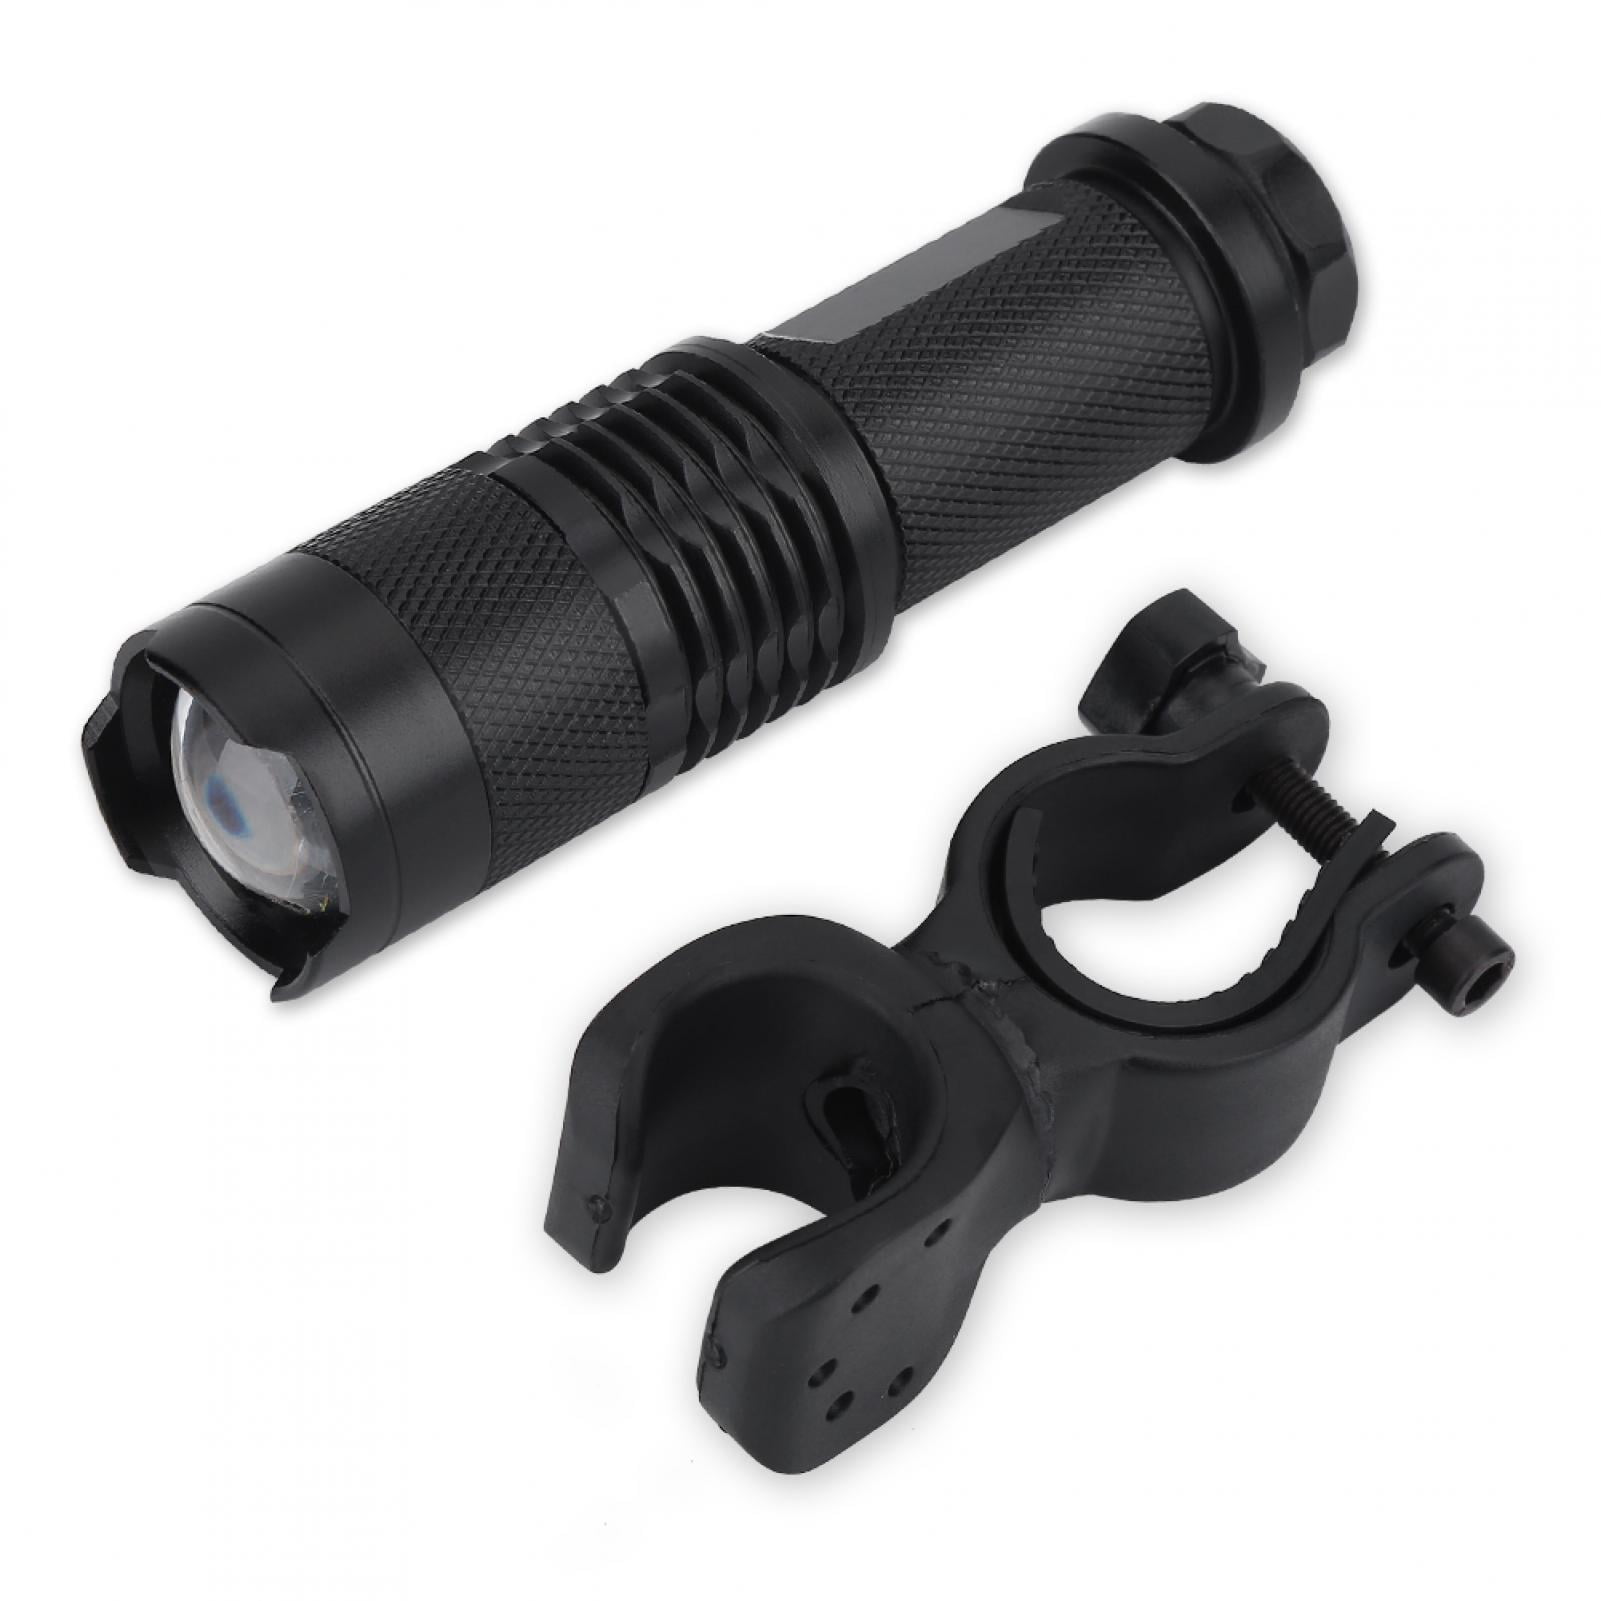 Details about   THE TORCH BY INCREDIBRIGHT SUPER BRIGHT LED BIKE LIGHT BLACK COLOR 